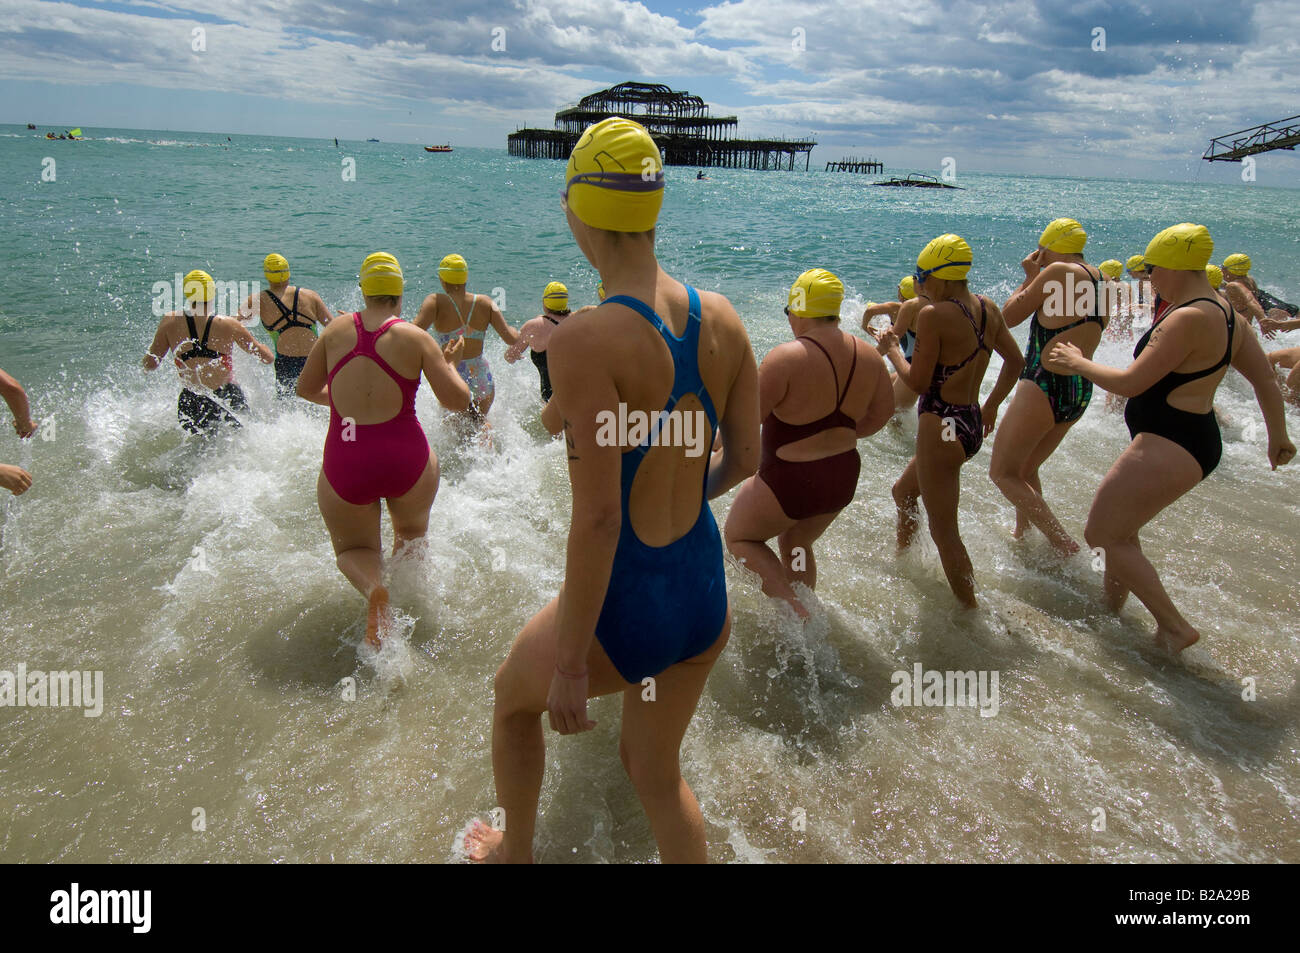 Female swimmers rush into the sea at Brighton for the annual pier to pier race. Stock Photo